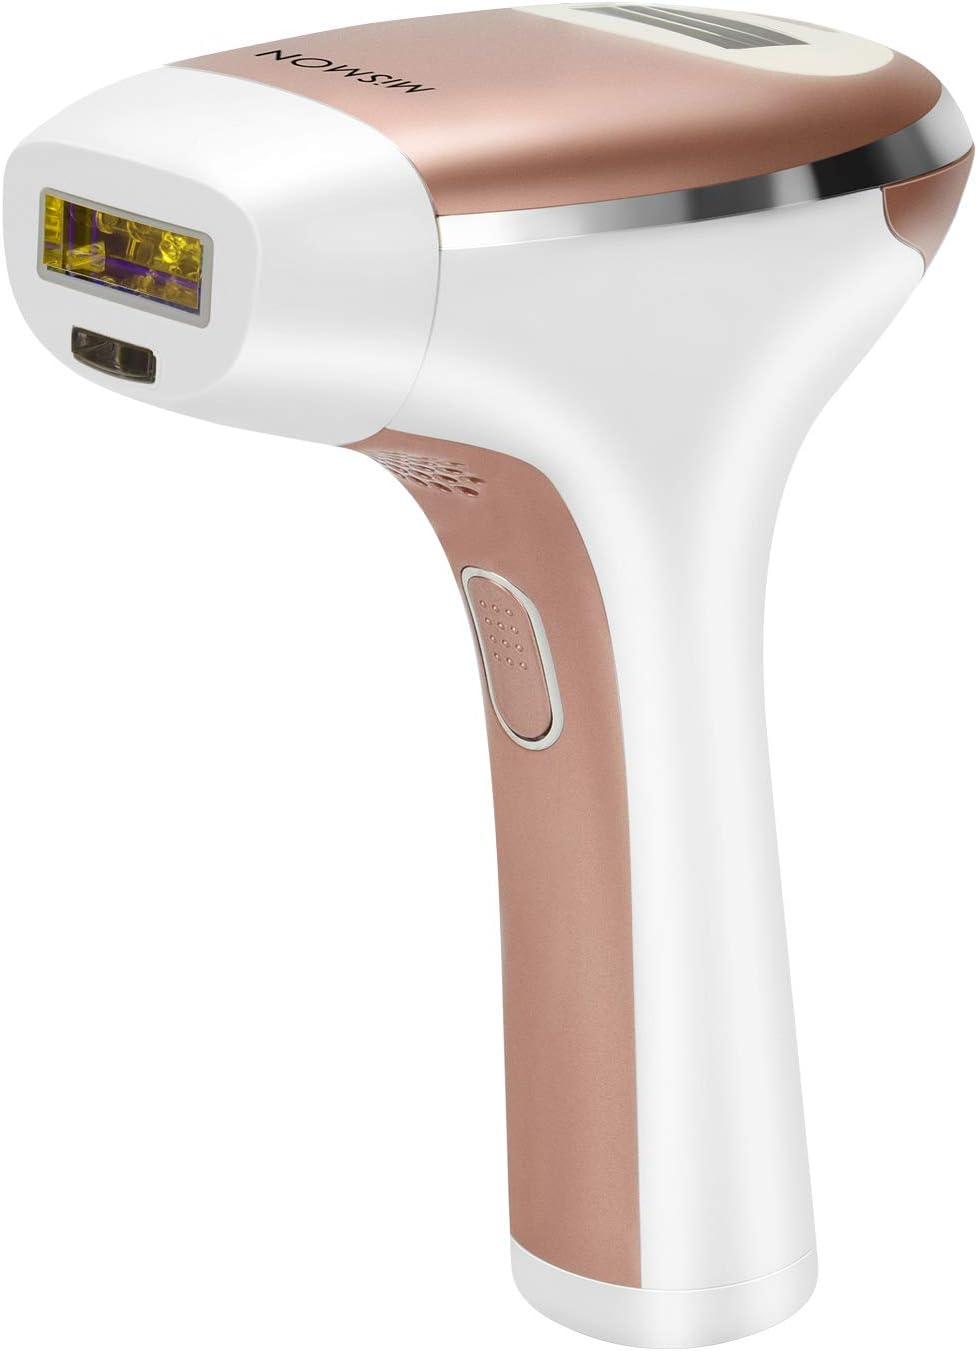 Buy Permanent Hair Removal MiSMON IPL Hair Removal for WomenMen at-Home  Hair Removal Machine for BikiniLegsUnderarmArmBody with Skin Color Sensor -  ...